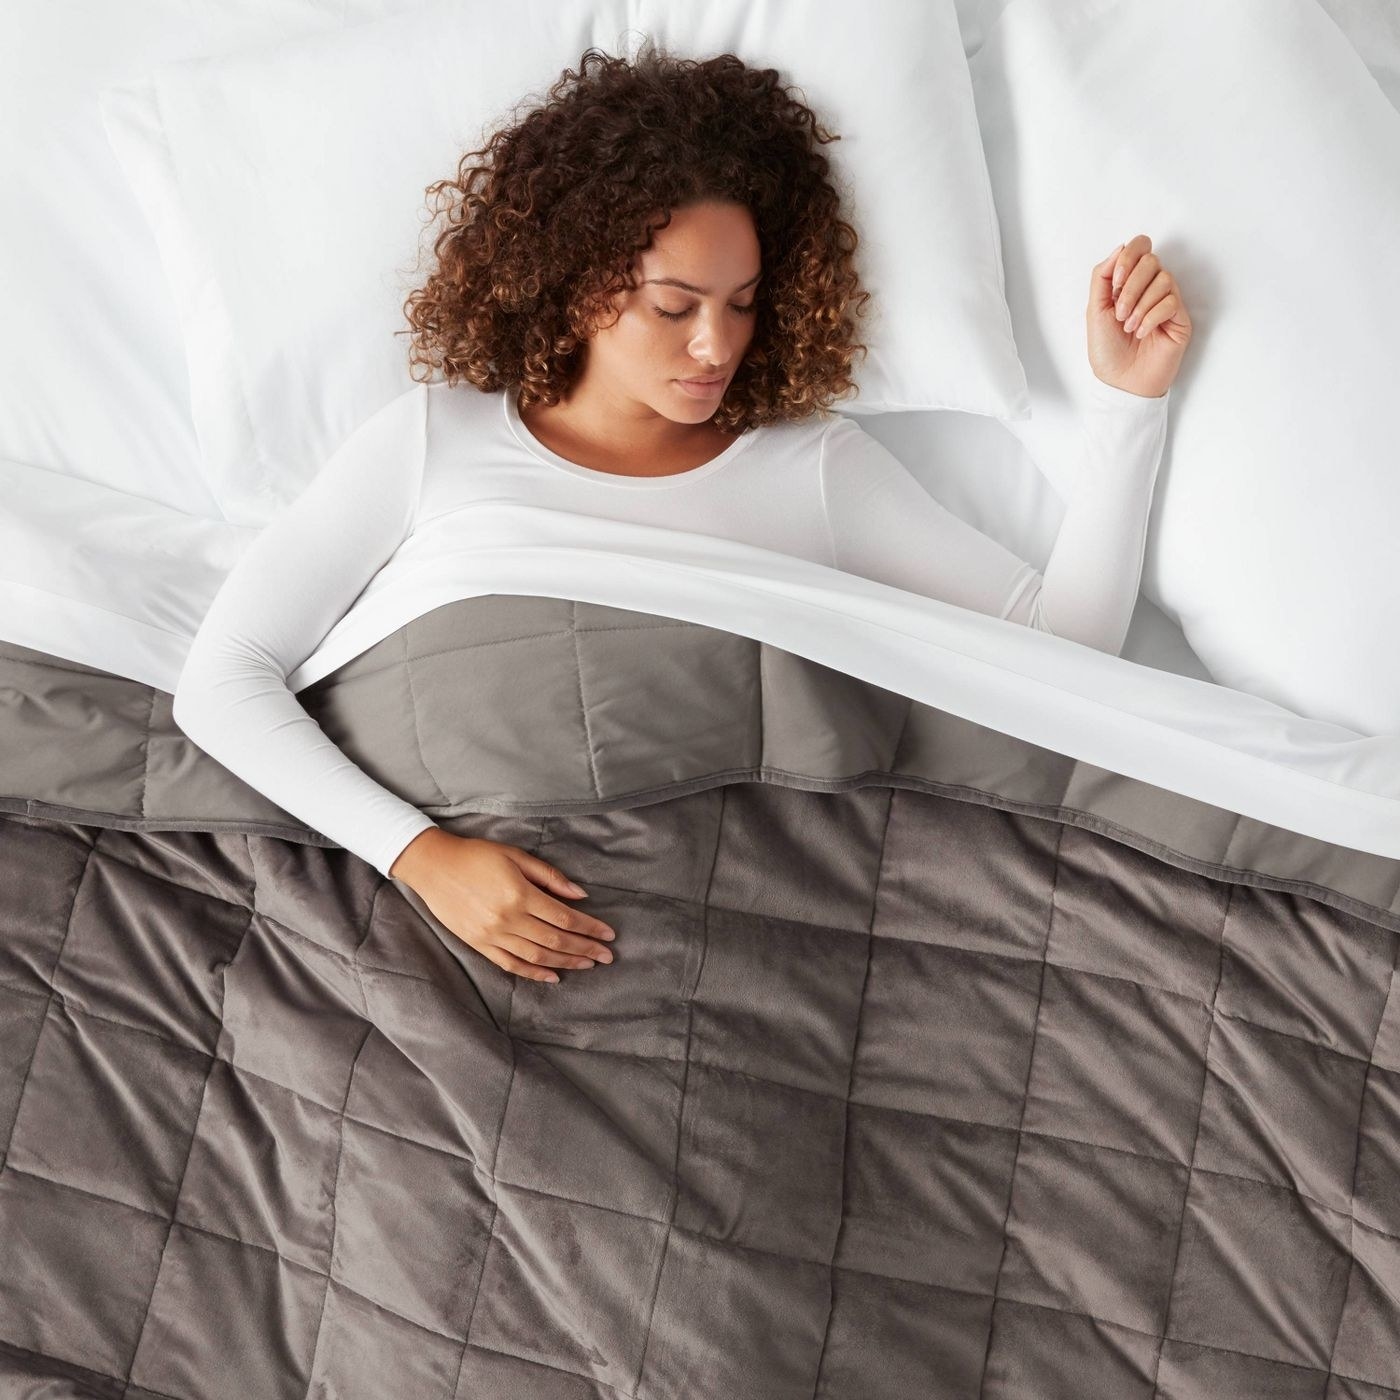 The weighted blanket, which has box stitching, in gray